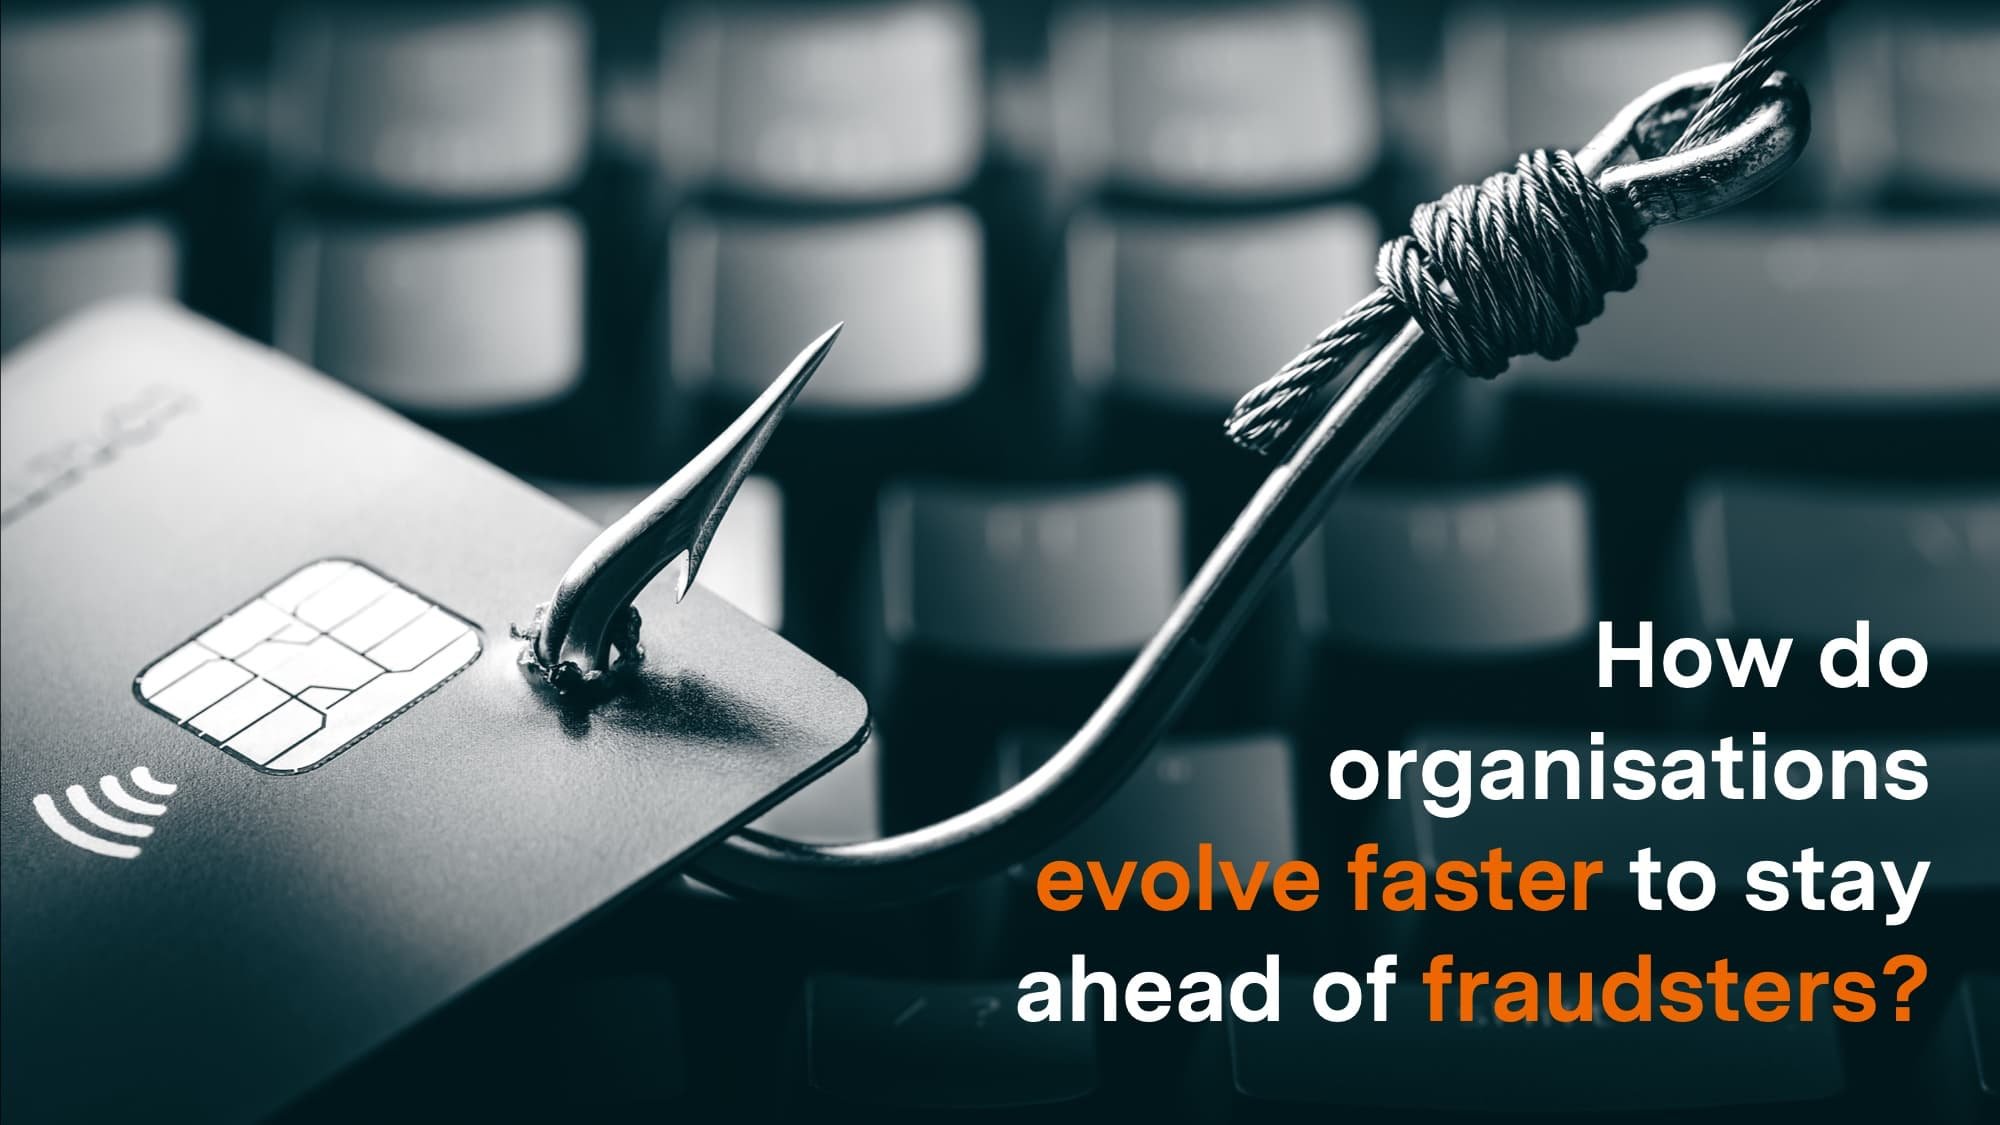 How do organisations evolve faster to stay ahead of fraudsters?